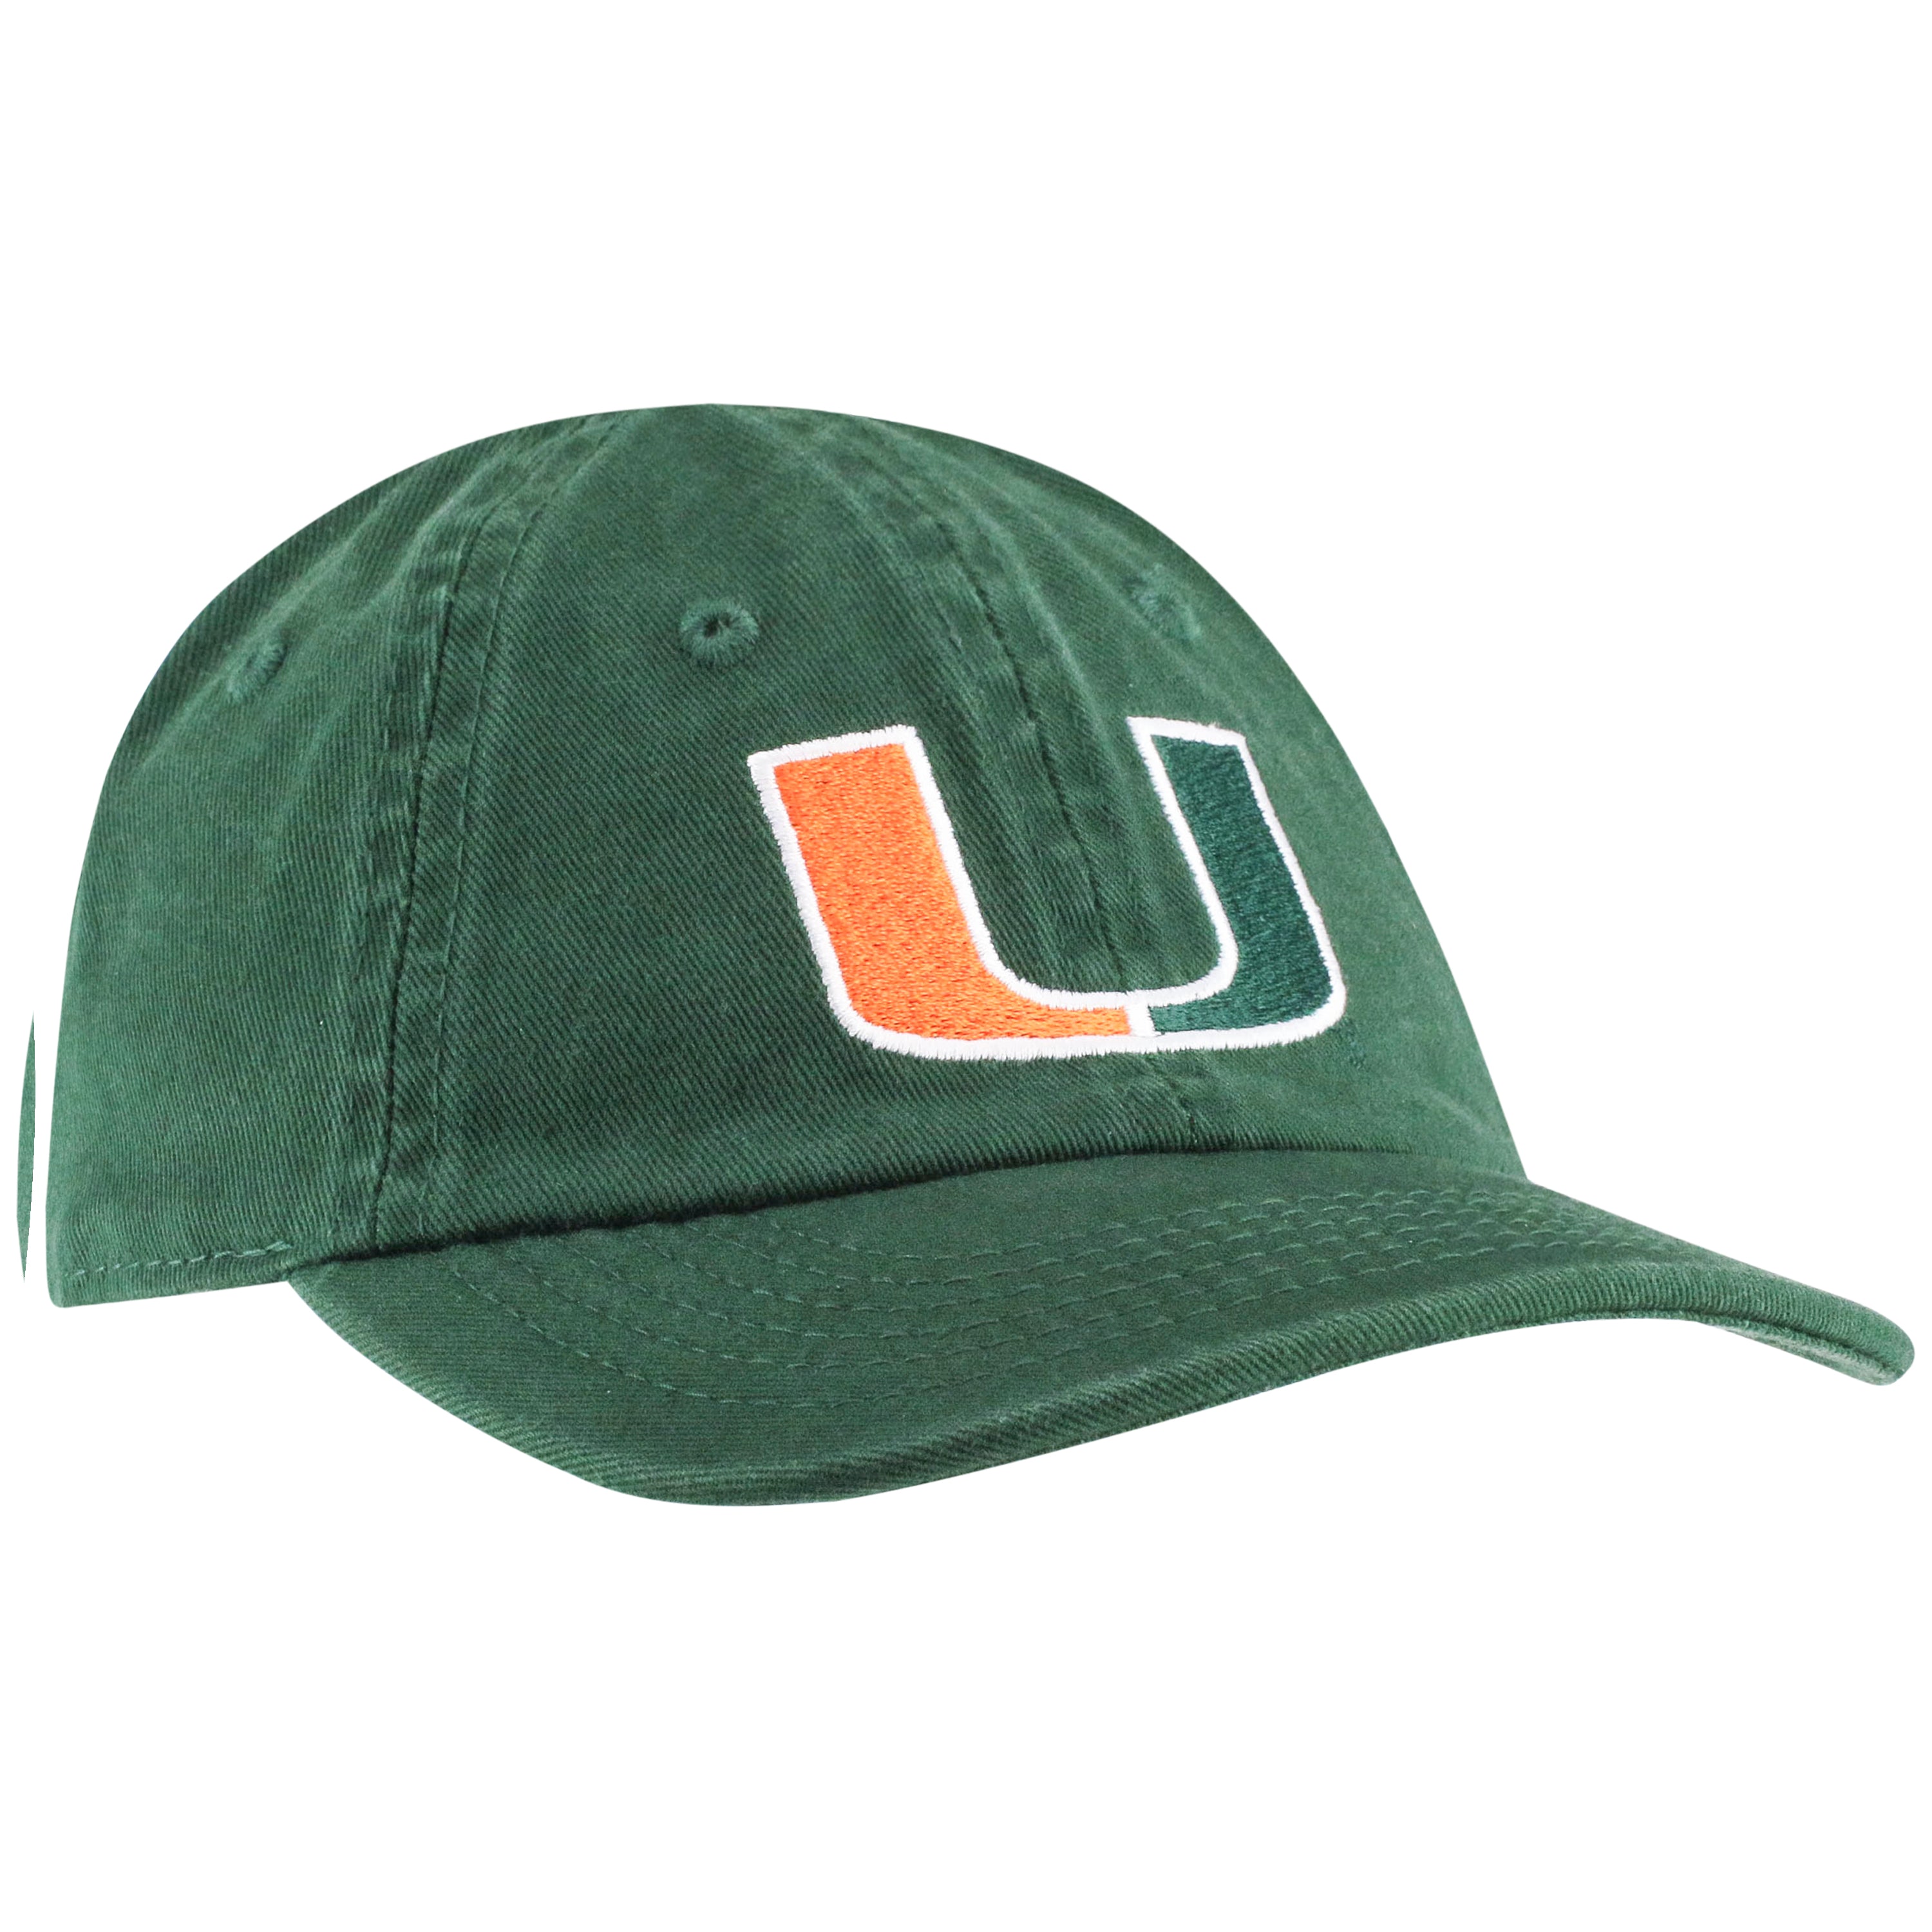 Miami Hurricanes Top of the World Infant Mini Me Snapback Green Hat